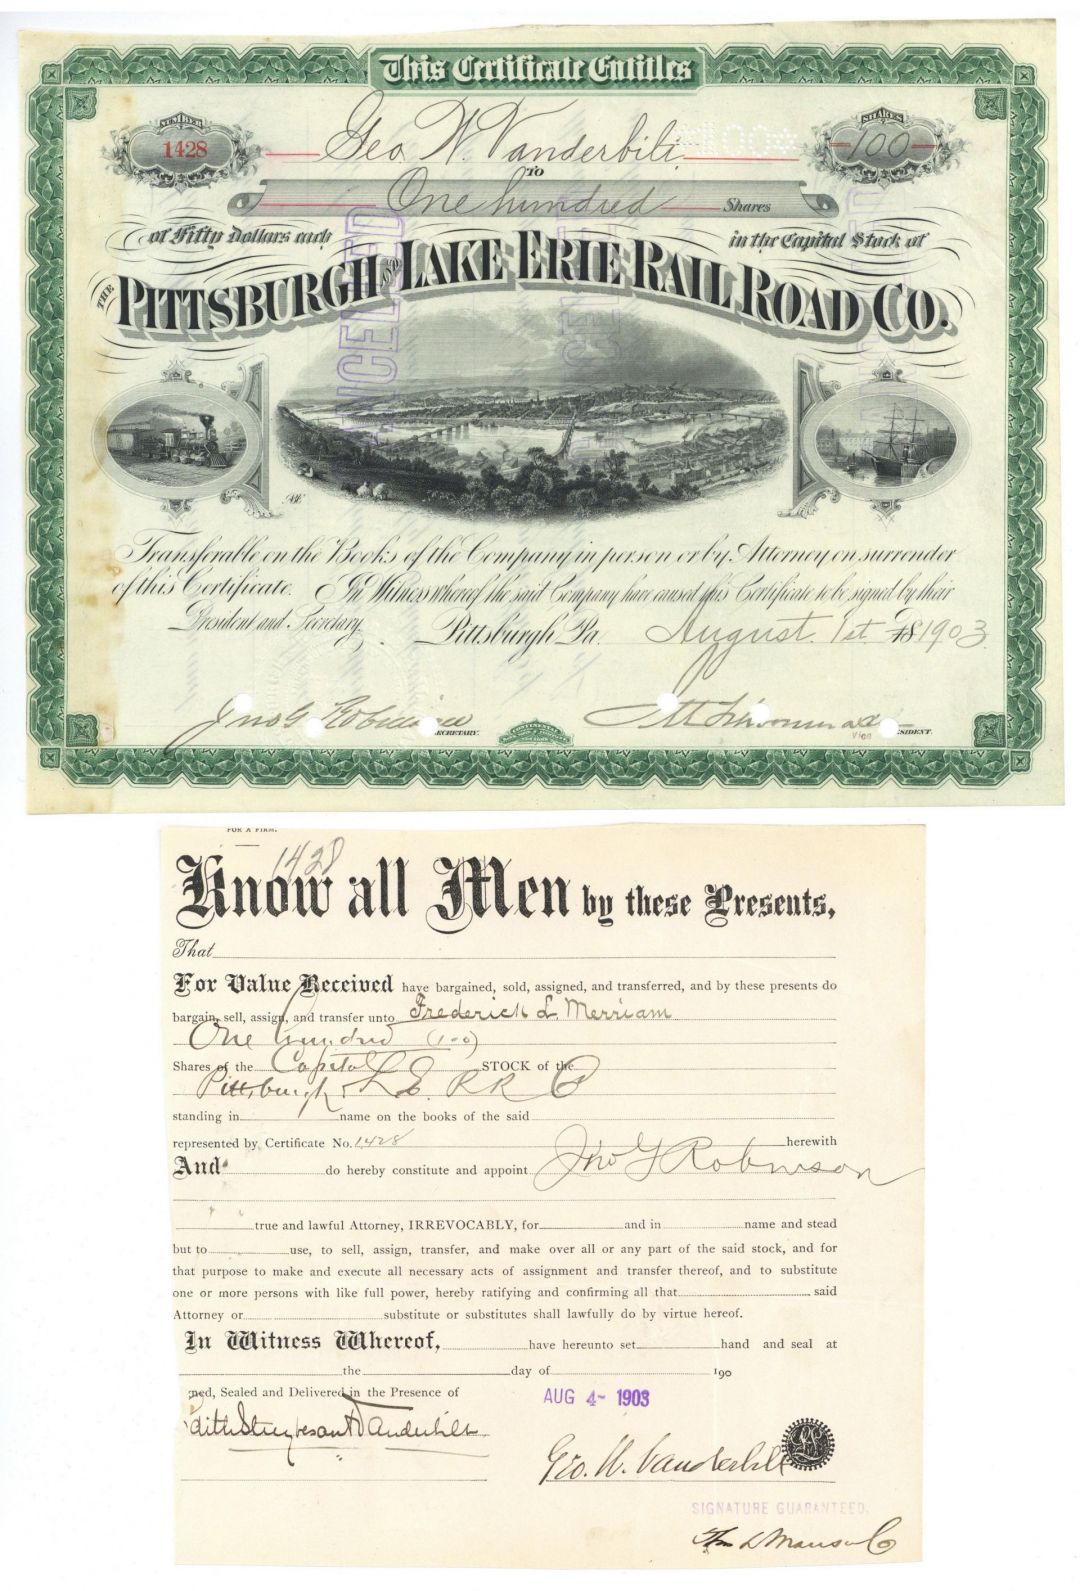 Issue to & Signed by George W. Vanderbilt II on Pittsburgh & Lake Erie Railroad Co. - 1903 dated Autograph Stock Certificate